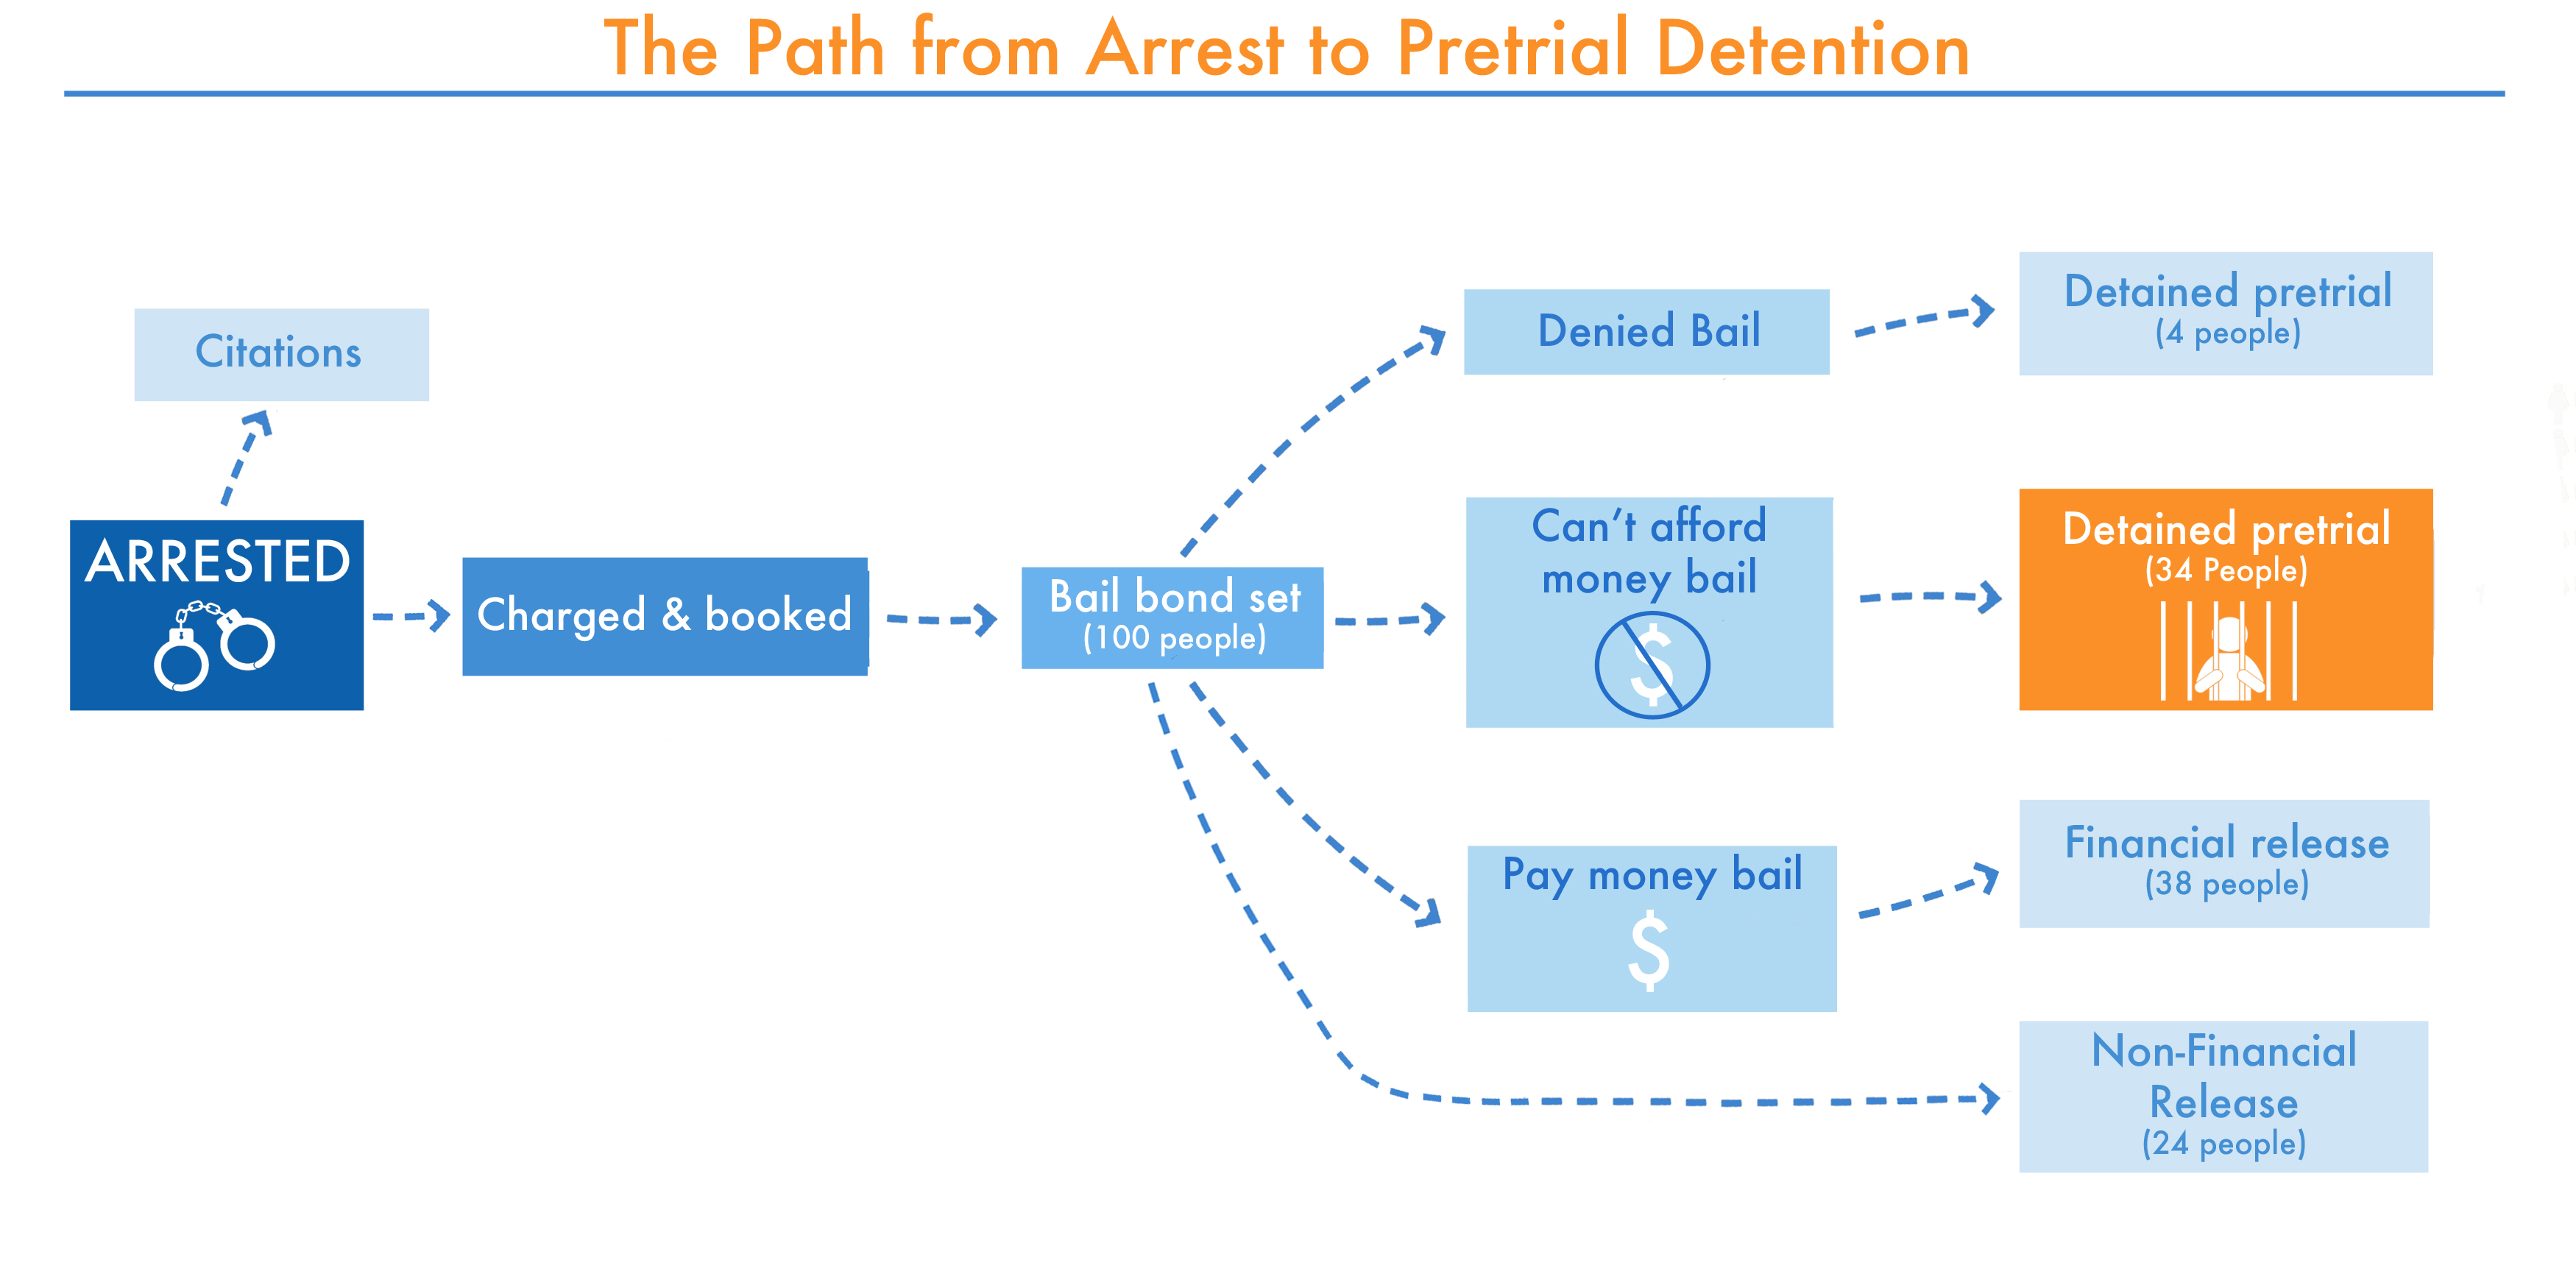 A graph showing the path from arrest to pretrial detention (source: Prison Policy Initiative)